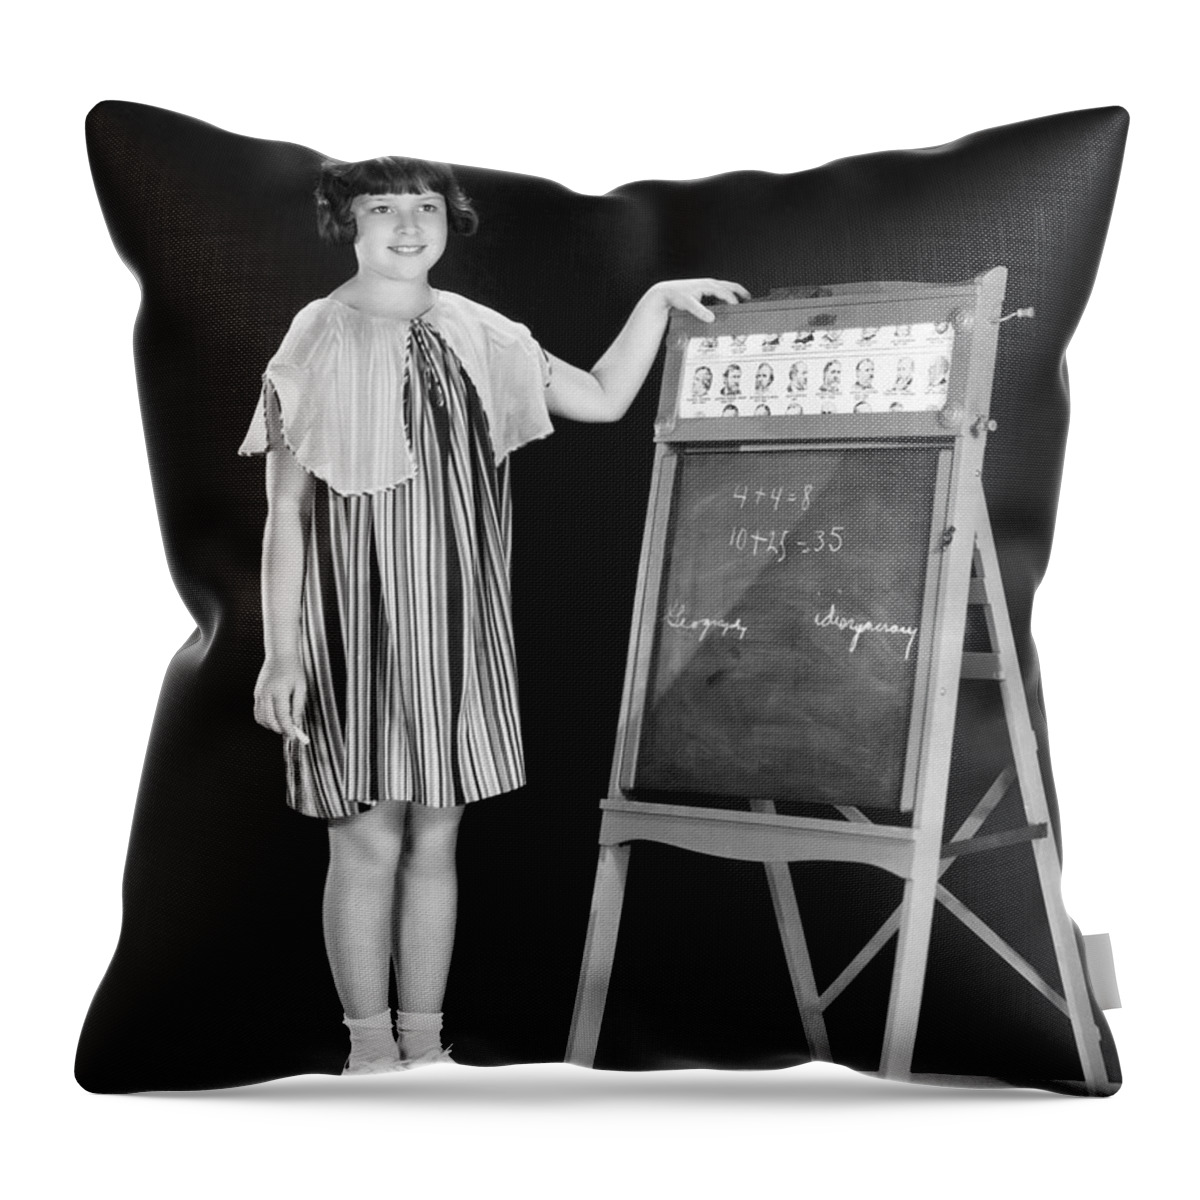 1 Person Throw Pillow featuring the photograph Young Student At Blackboard by Underwood Archives